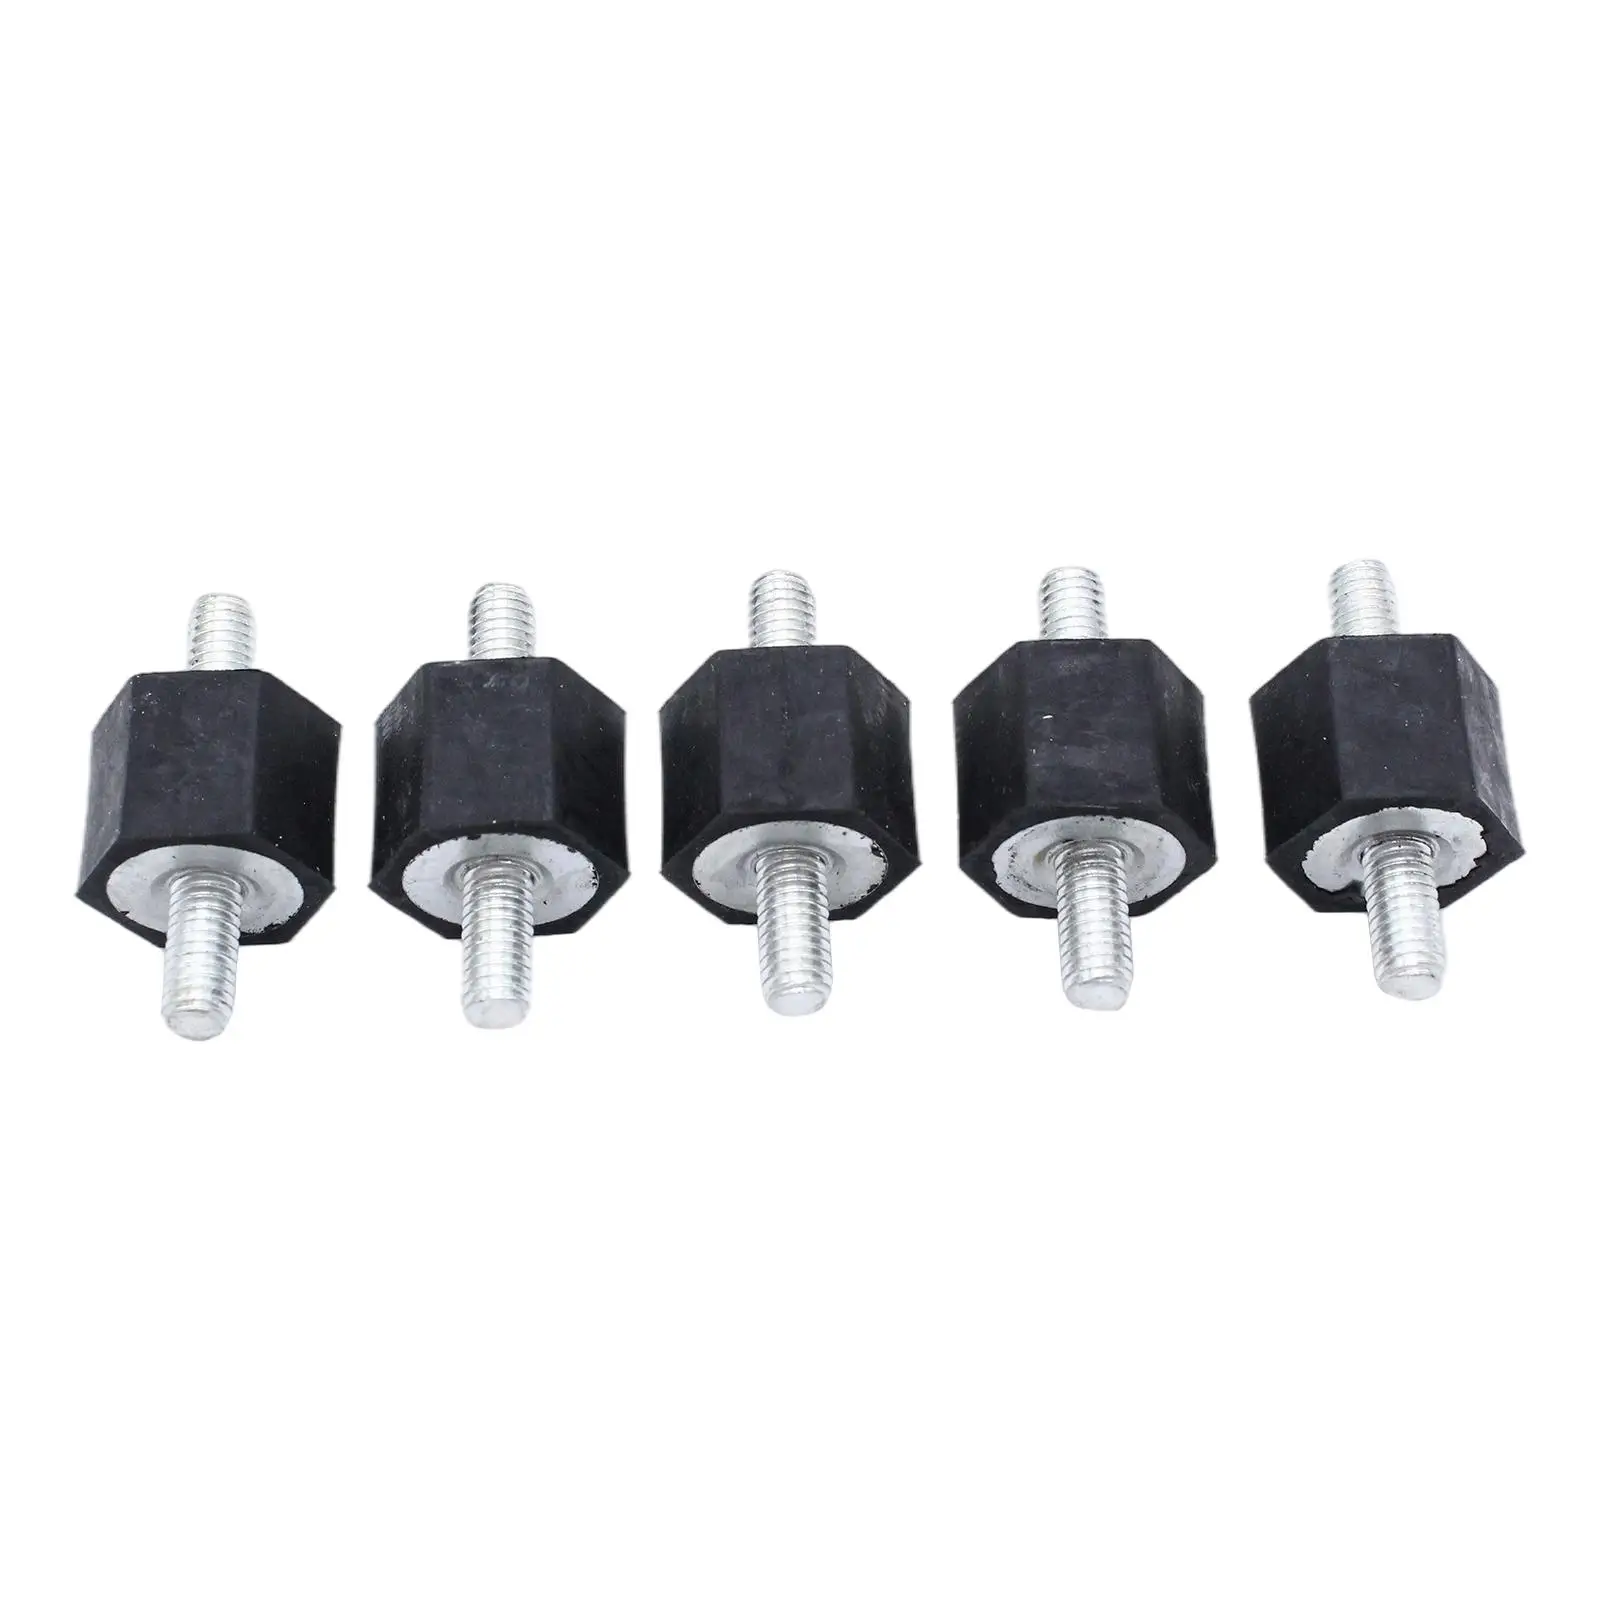 5x Fuel Pump Engine Cover Rubber Mounts for Golf MK2 for B4